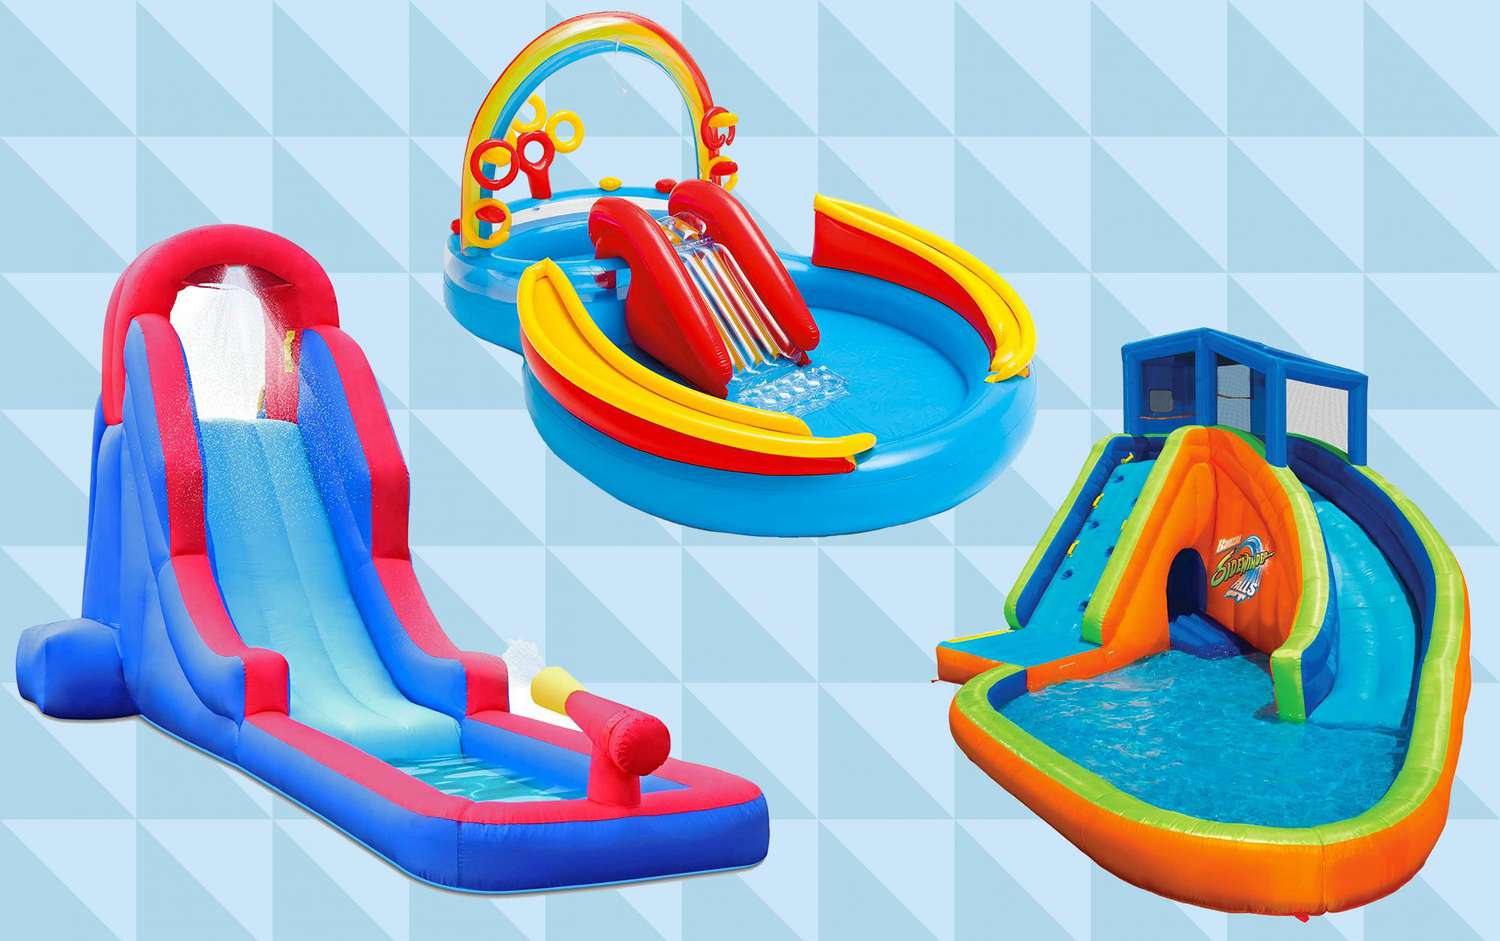 8 Best Inflatable Water Slides For Kids, How To Make A Water Slide For Above Ground Pool